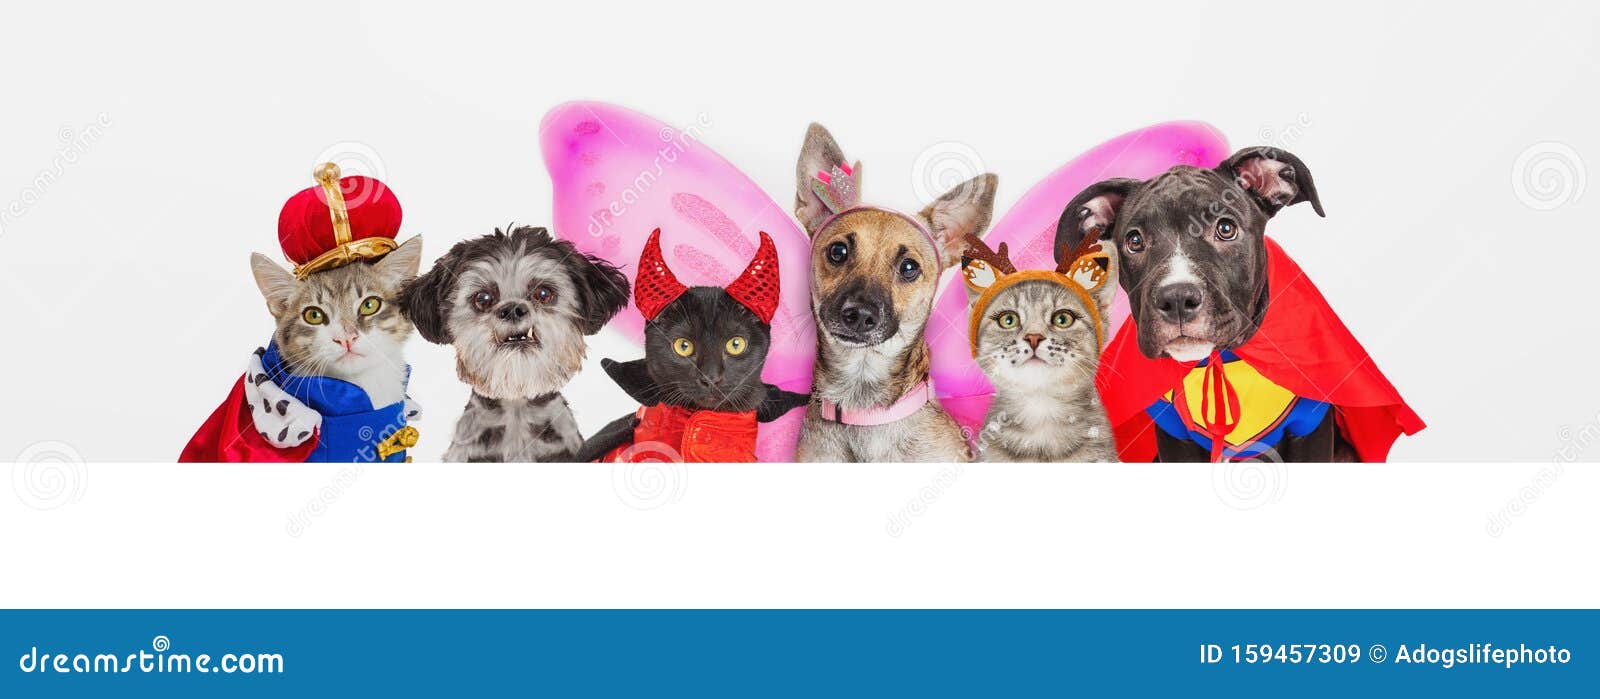 cute pets in halloween costumes over web banner